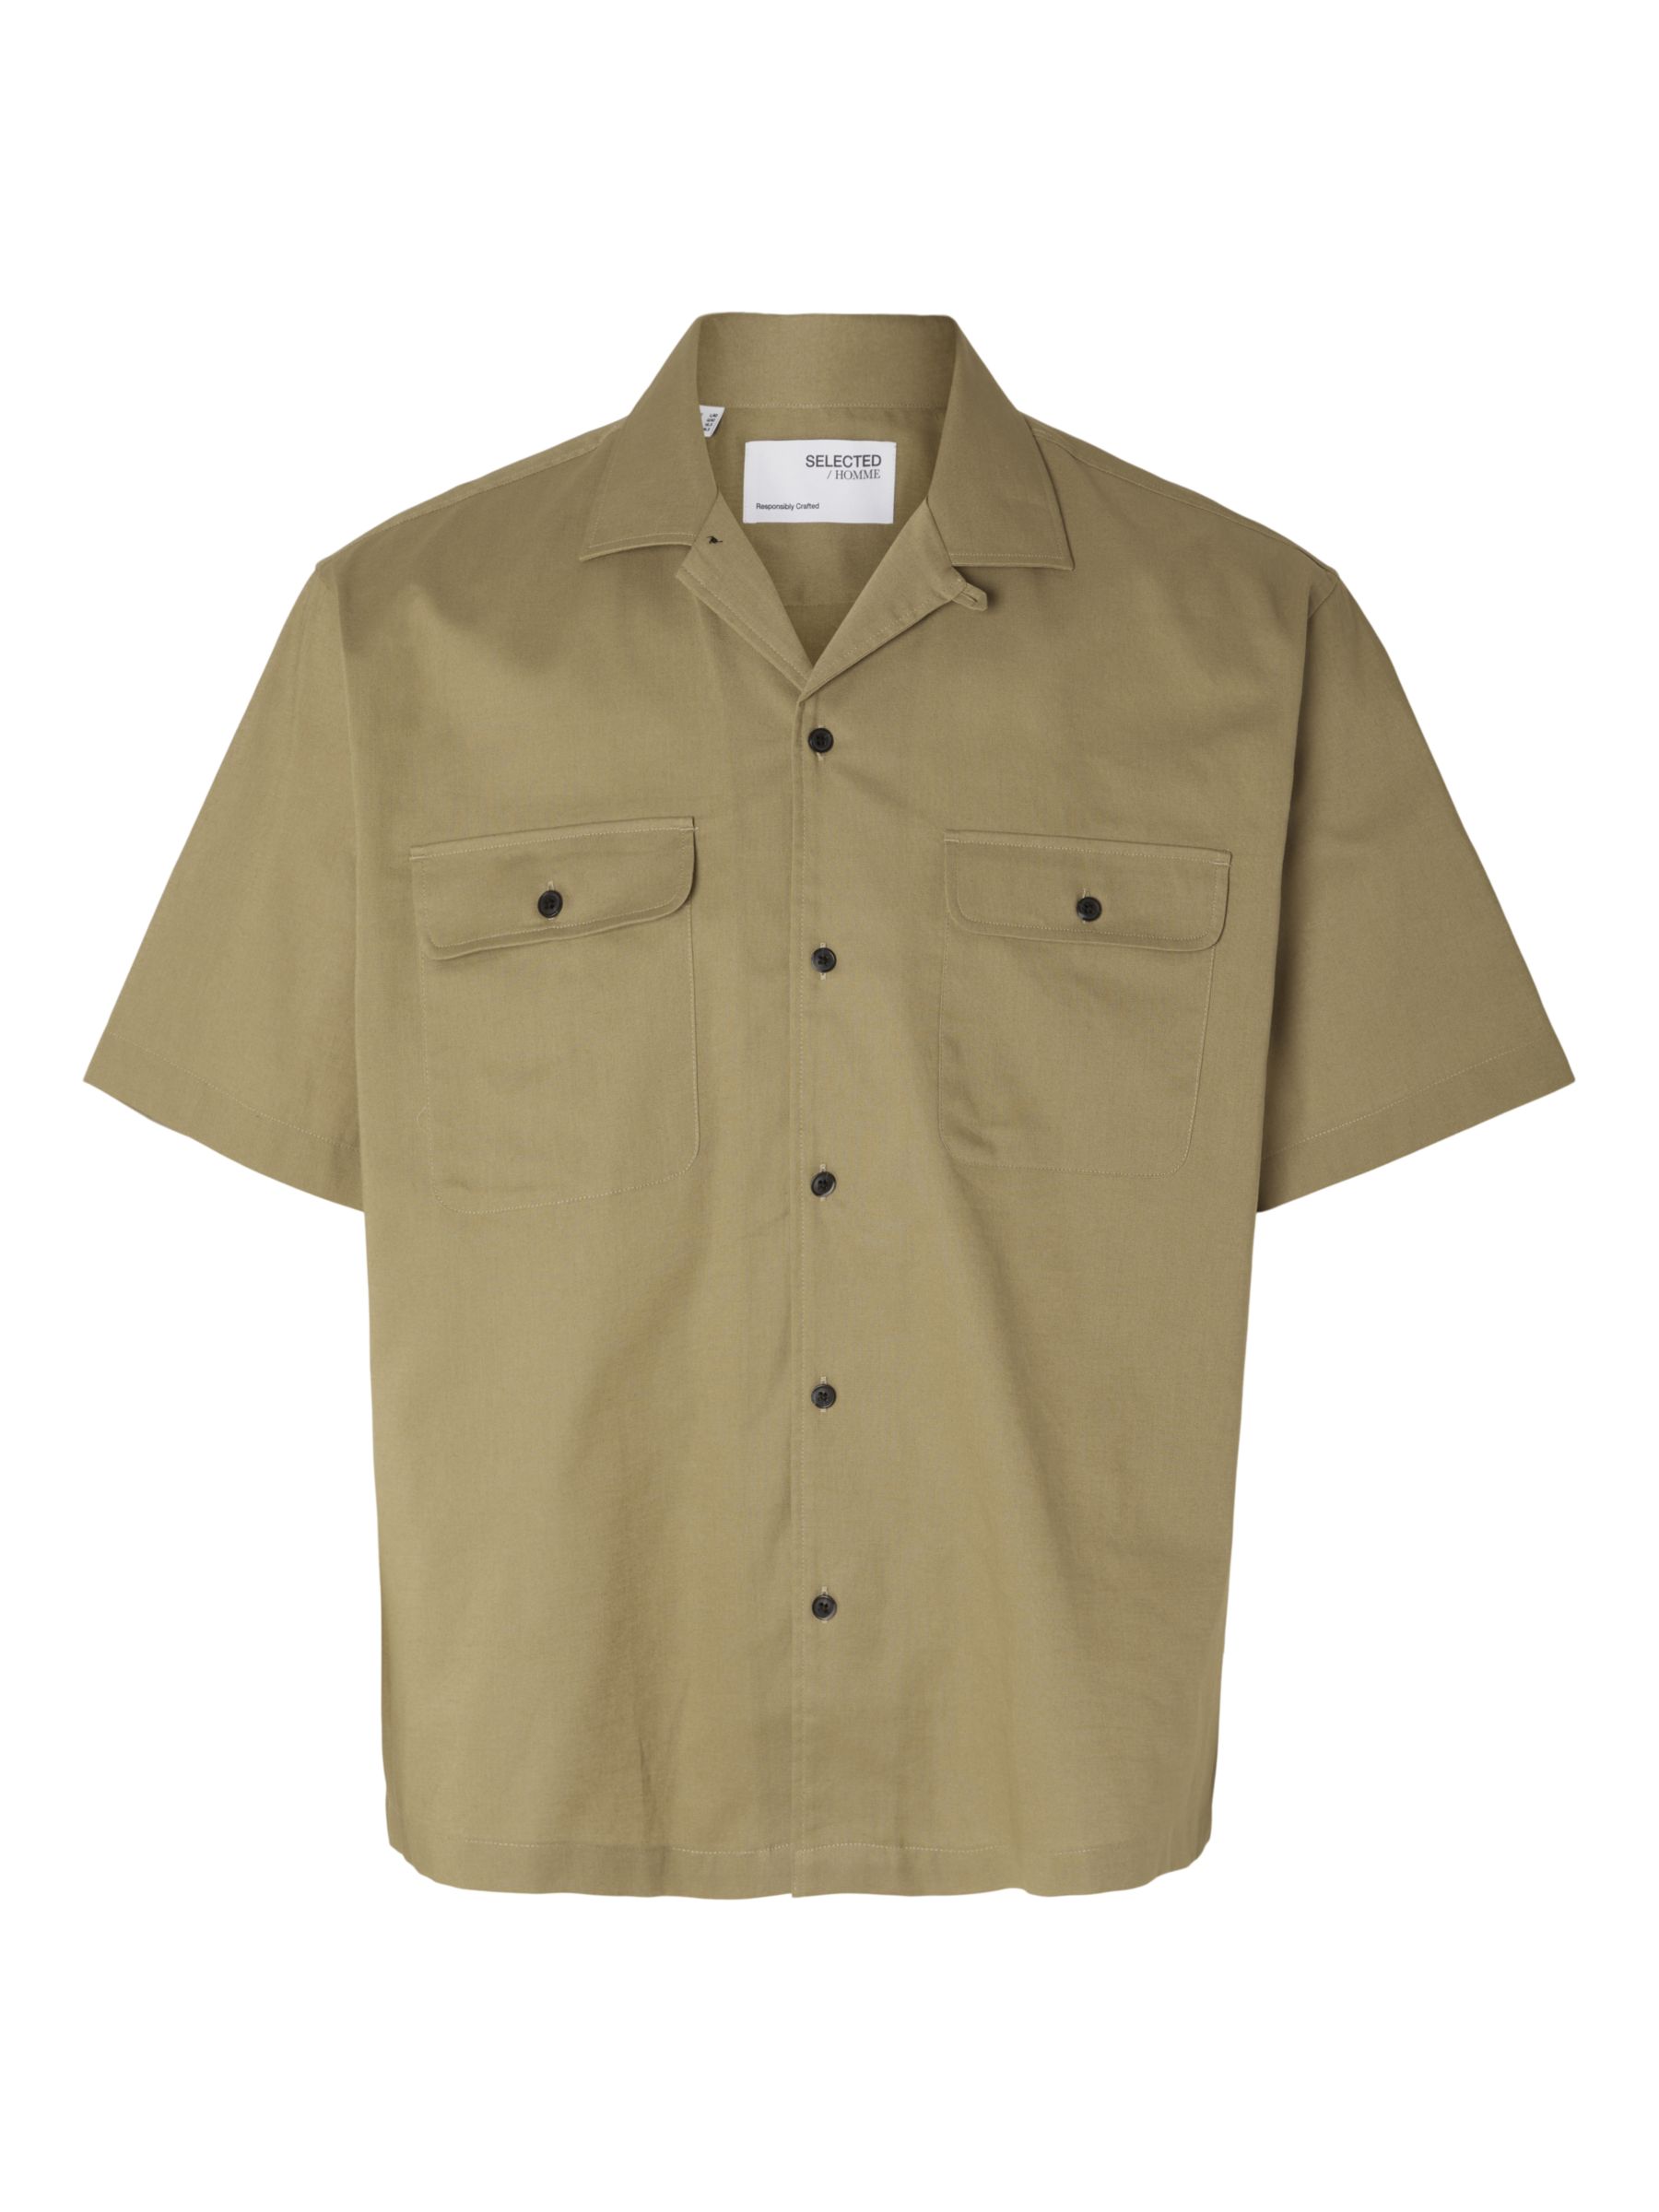 Buy SELECTED HOMME Boxy Short Sleeved Shirt, Green Online at johnlewis.com